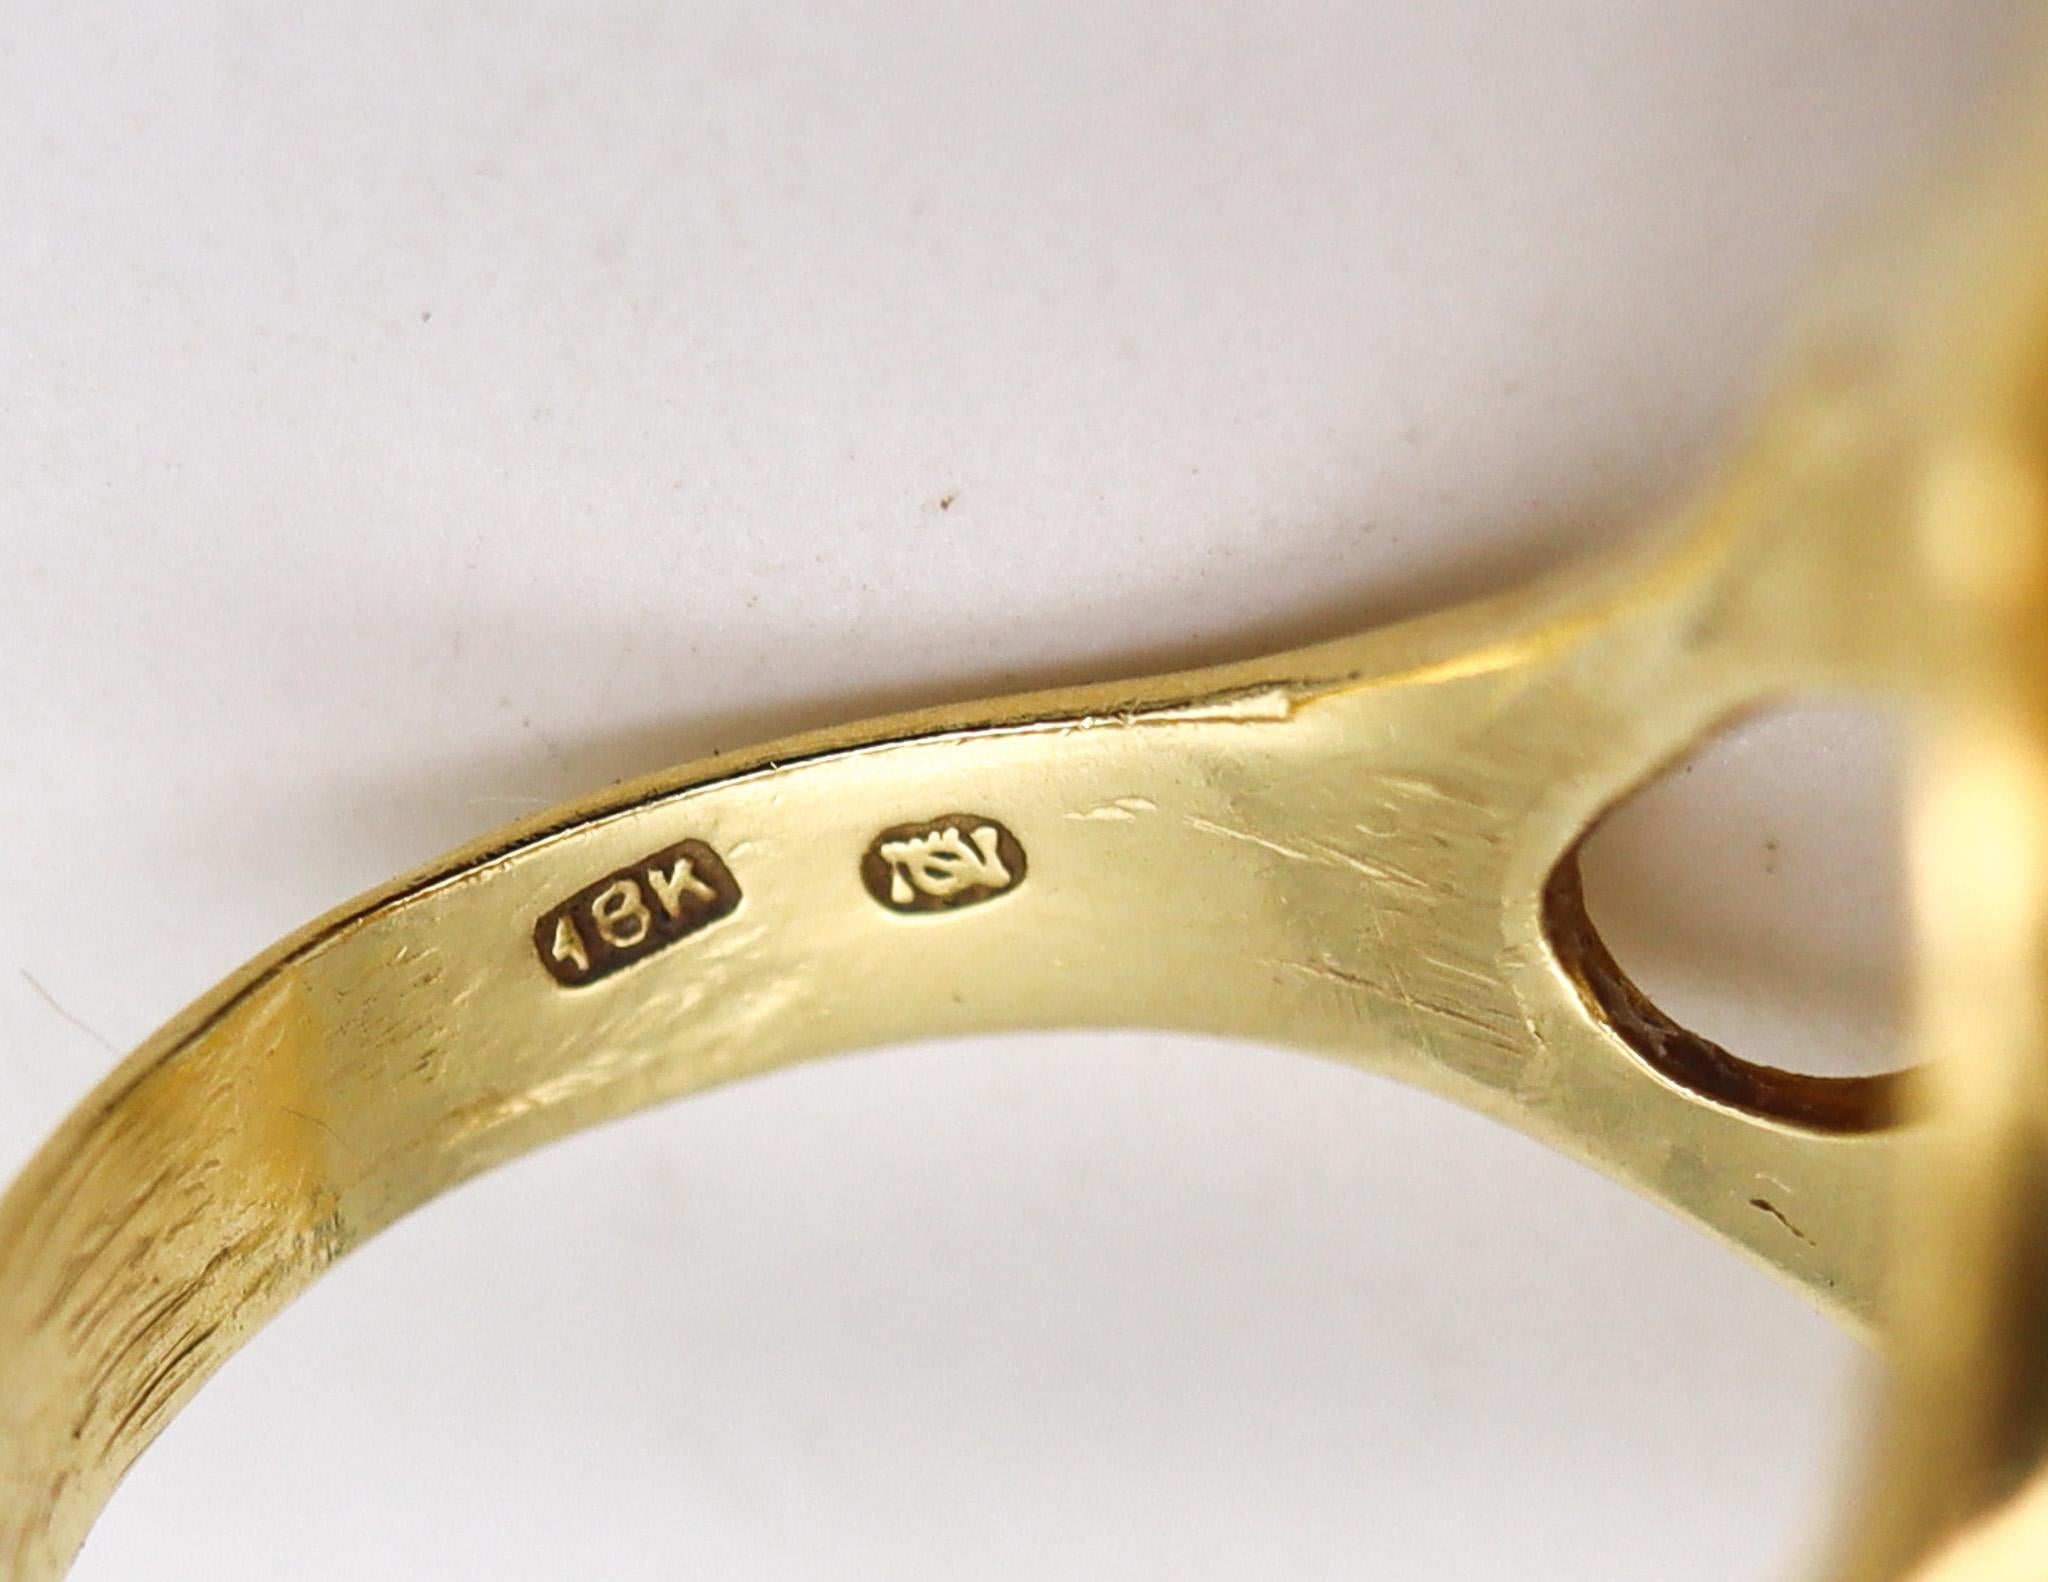 A sculptural Israeli ring.

An incredible beautiful ring, made in Israel back in the 1970's. Crafted with free forms patterns in solid yellow gold of 18 karats with high polished finish. The design is a sculptural one, composed of several elements